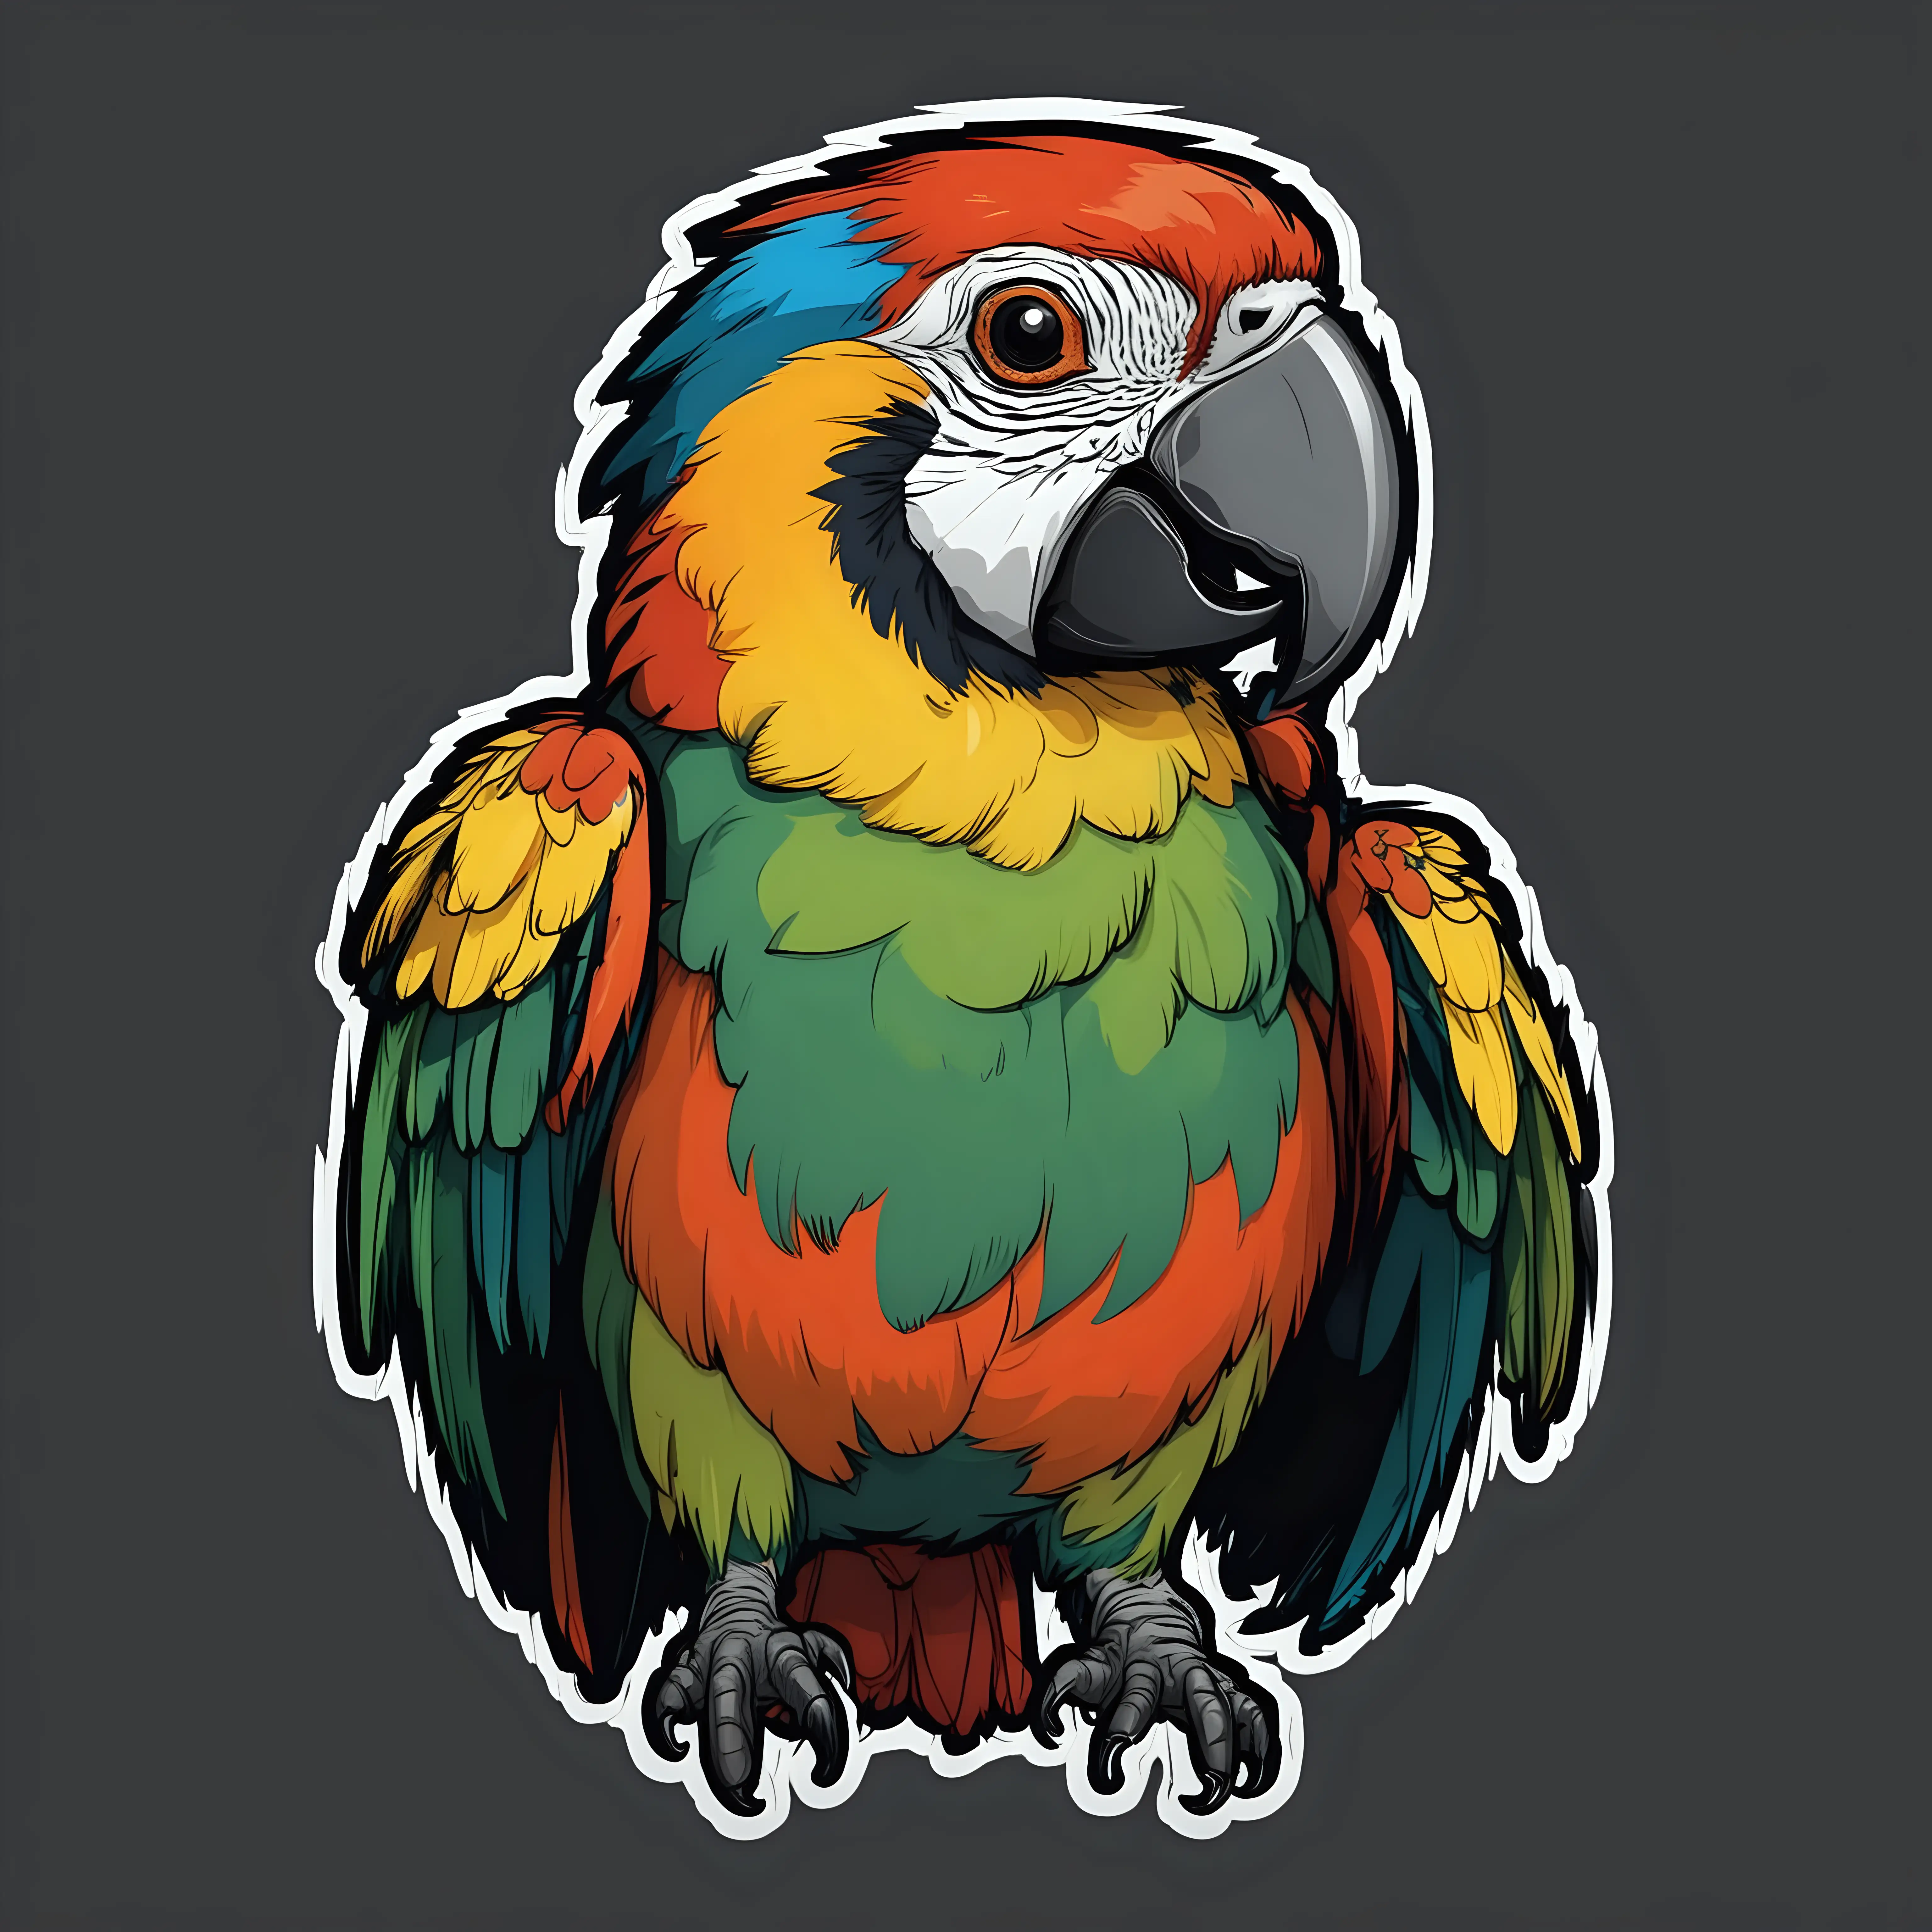 Sticker of a parrot full body, caricature style, exaggerated features, bold lines, Die-cut sticker, vector, black background